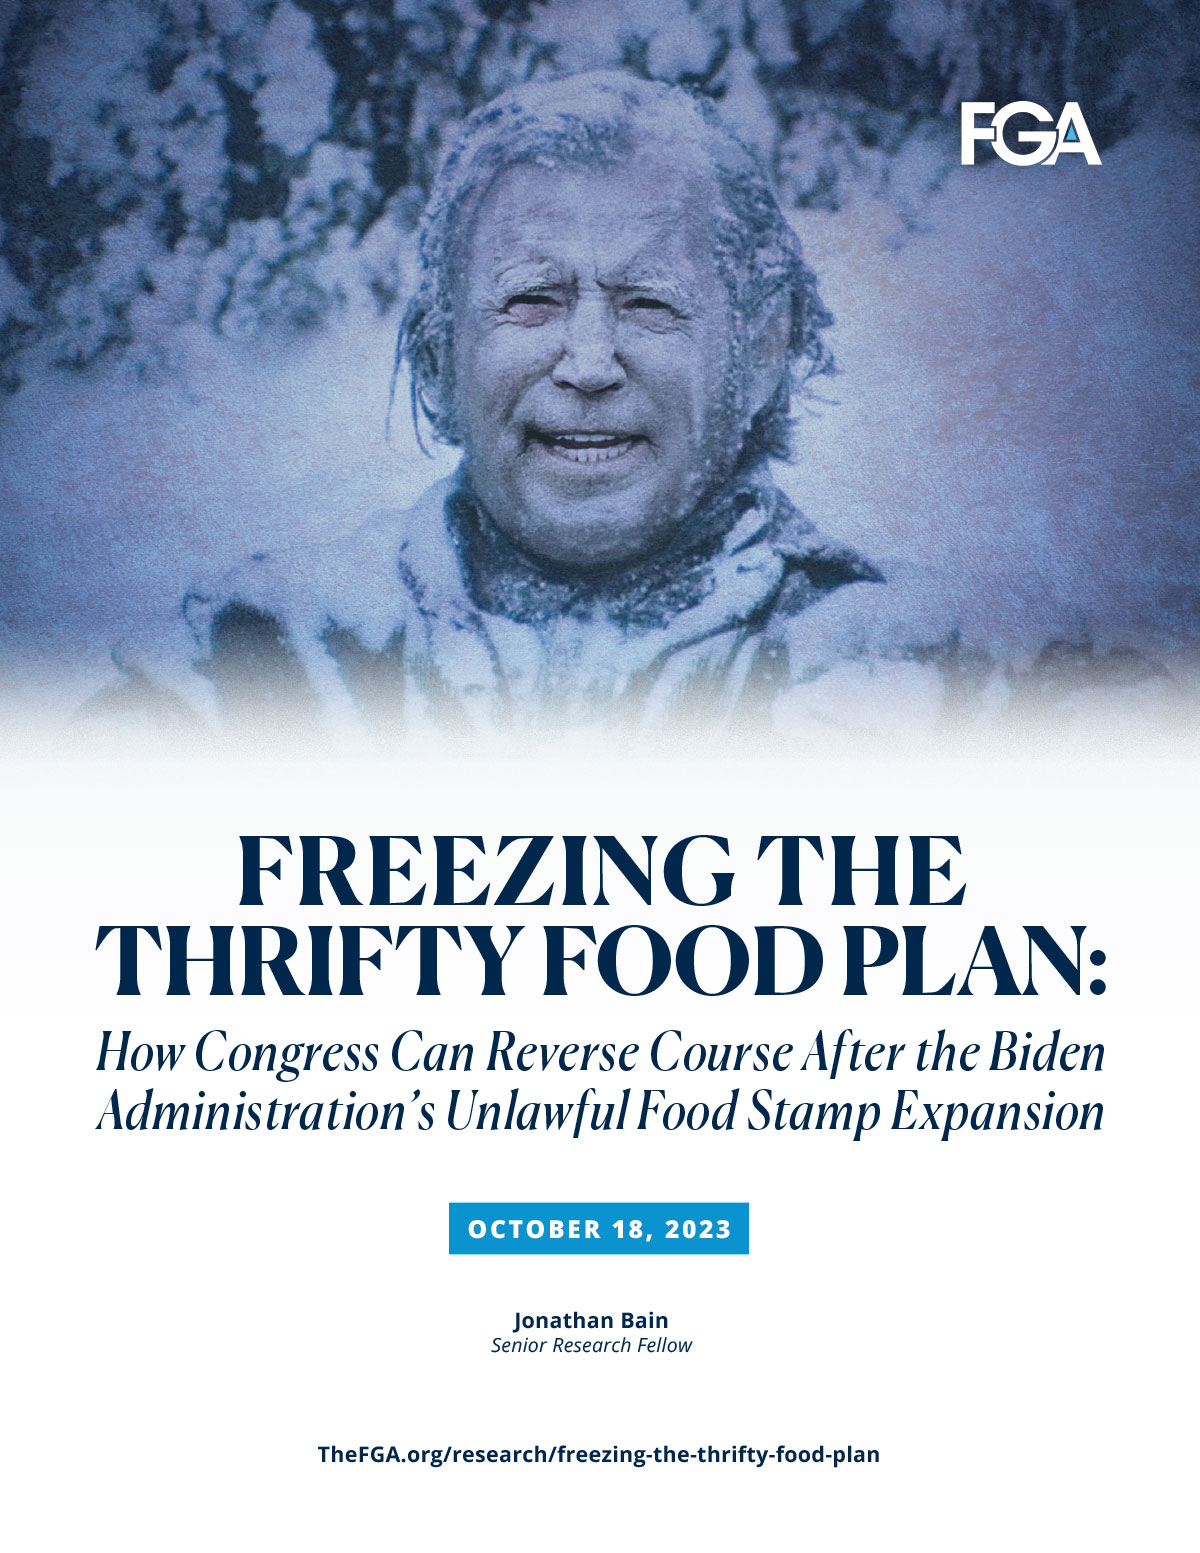 Freezing the Thrifty Food Plan: How Congress Can Reverse Course After the Biden Administration’s Unlawful Food Stamp Expansion